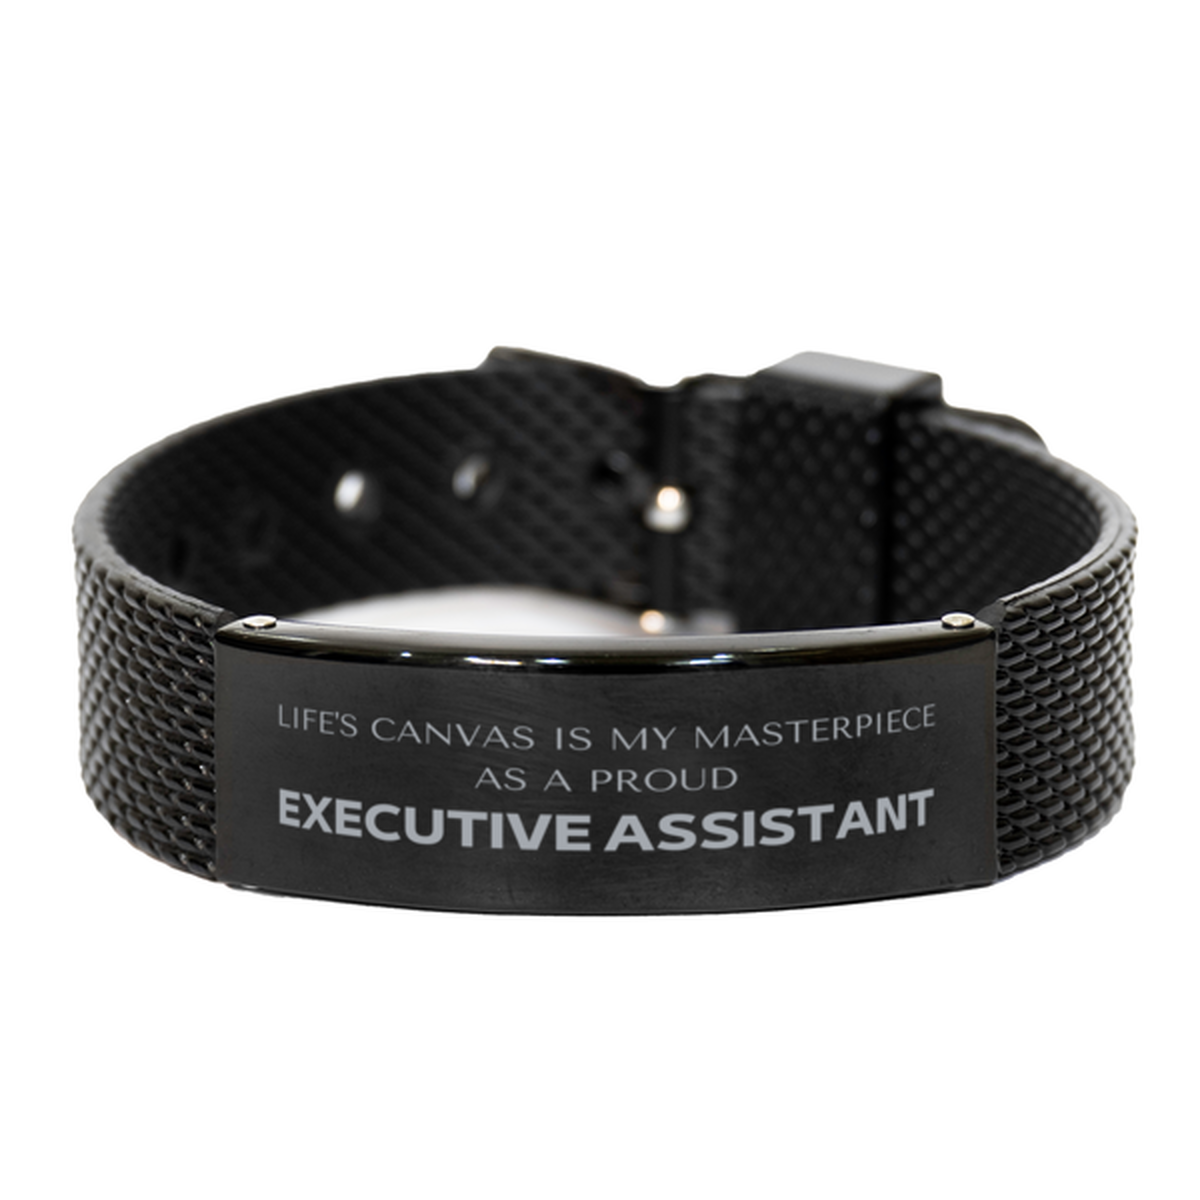 Proud Executive Assistant Gifts, Life's canvas is my masterpiece, Epic Birthday Christmas Unique Black Shark Mesh Bracelet For Executive Assistant, Coworkers, Men, Women, Friends